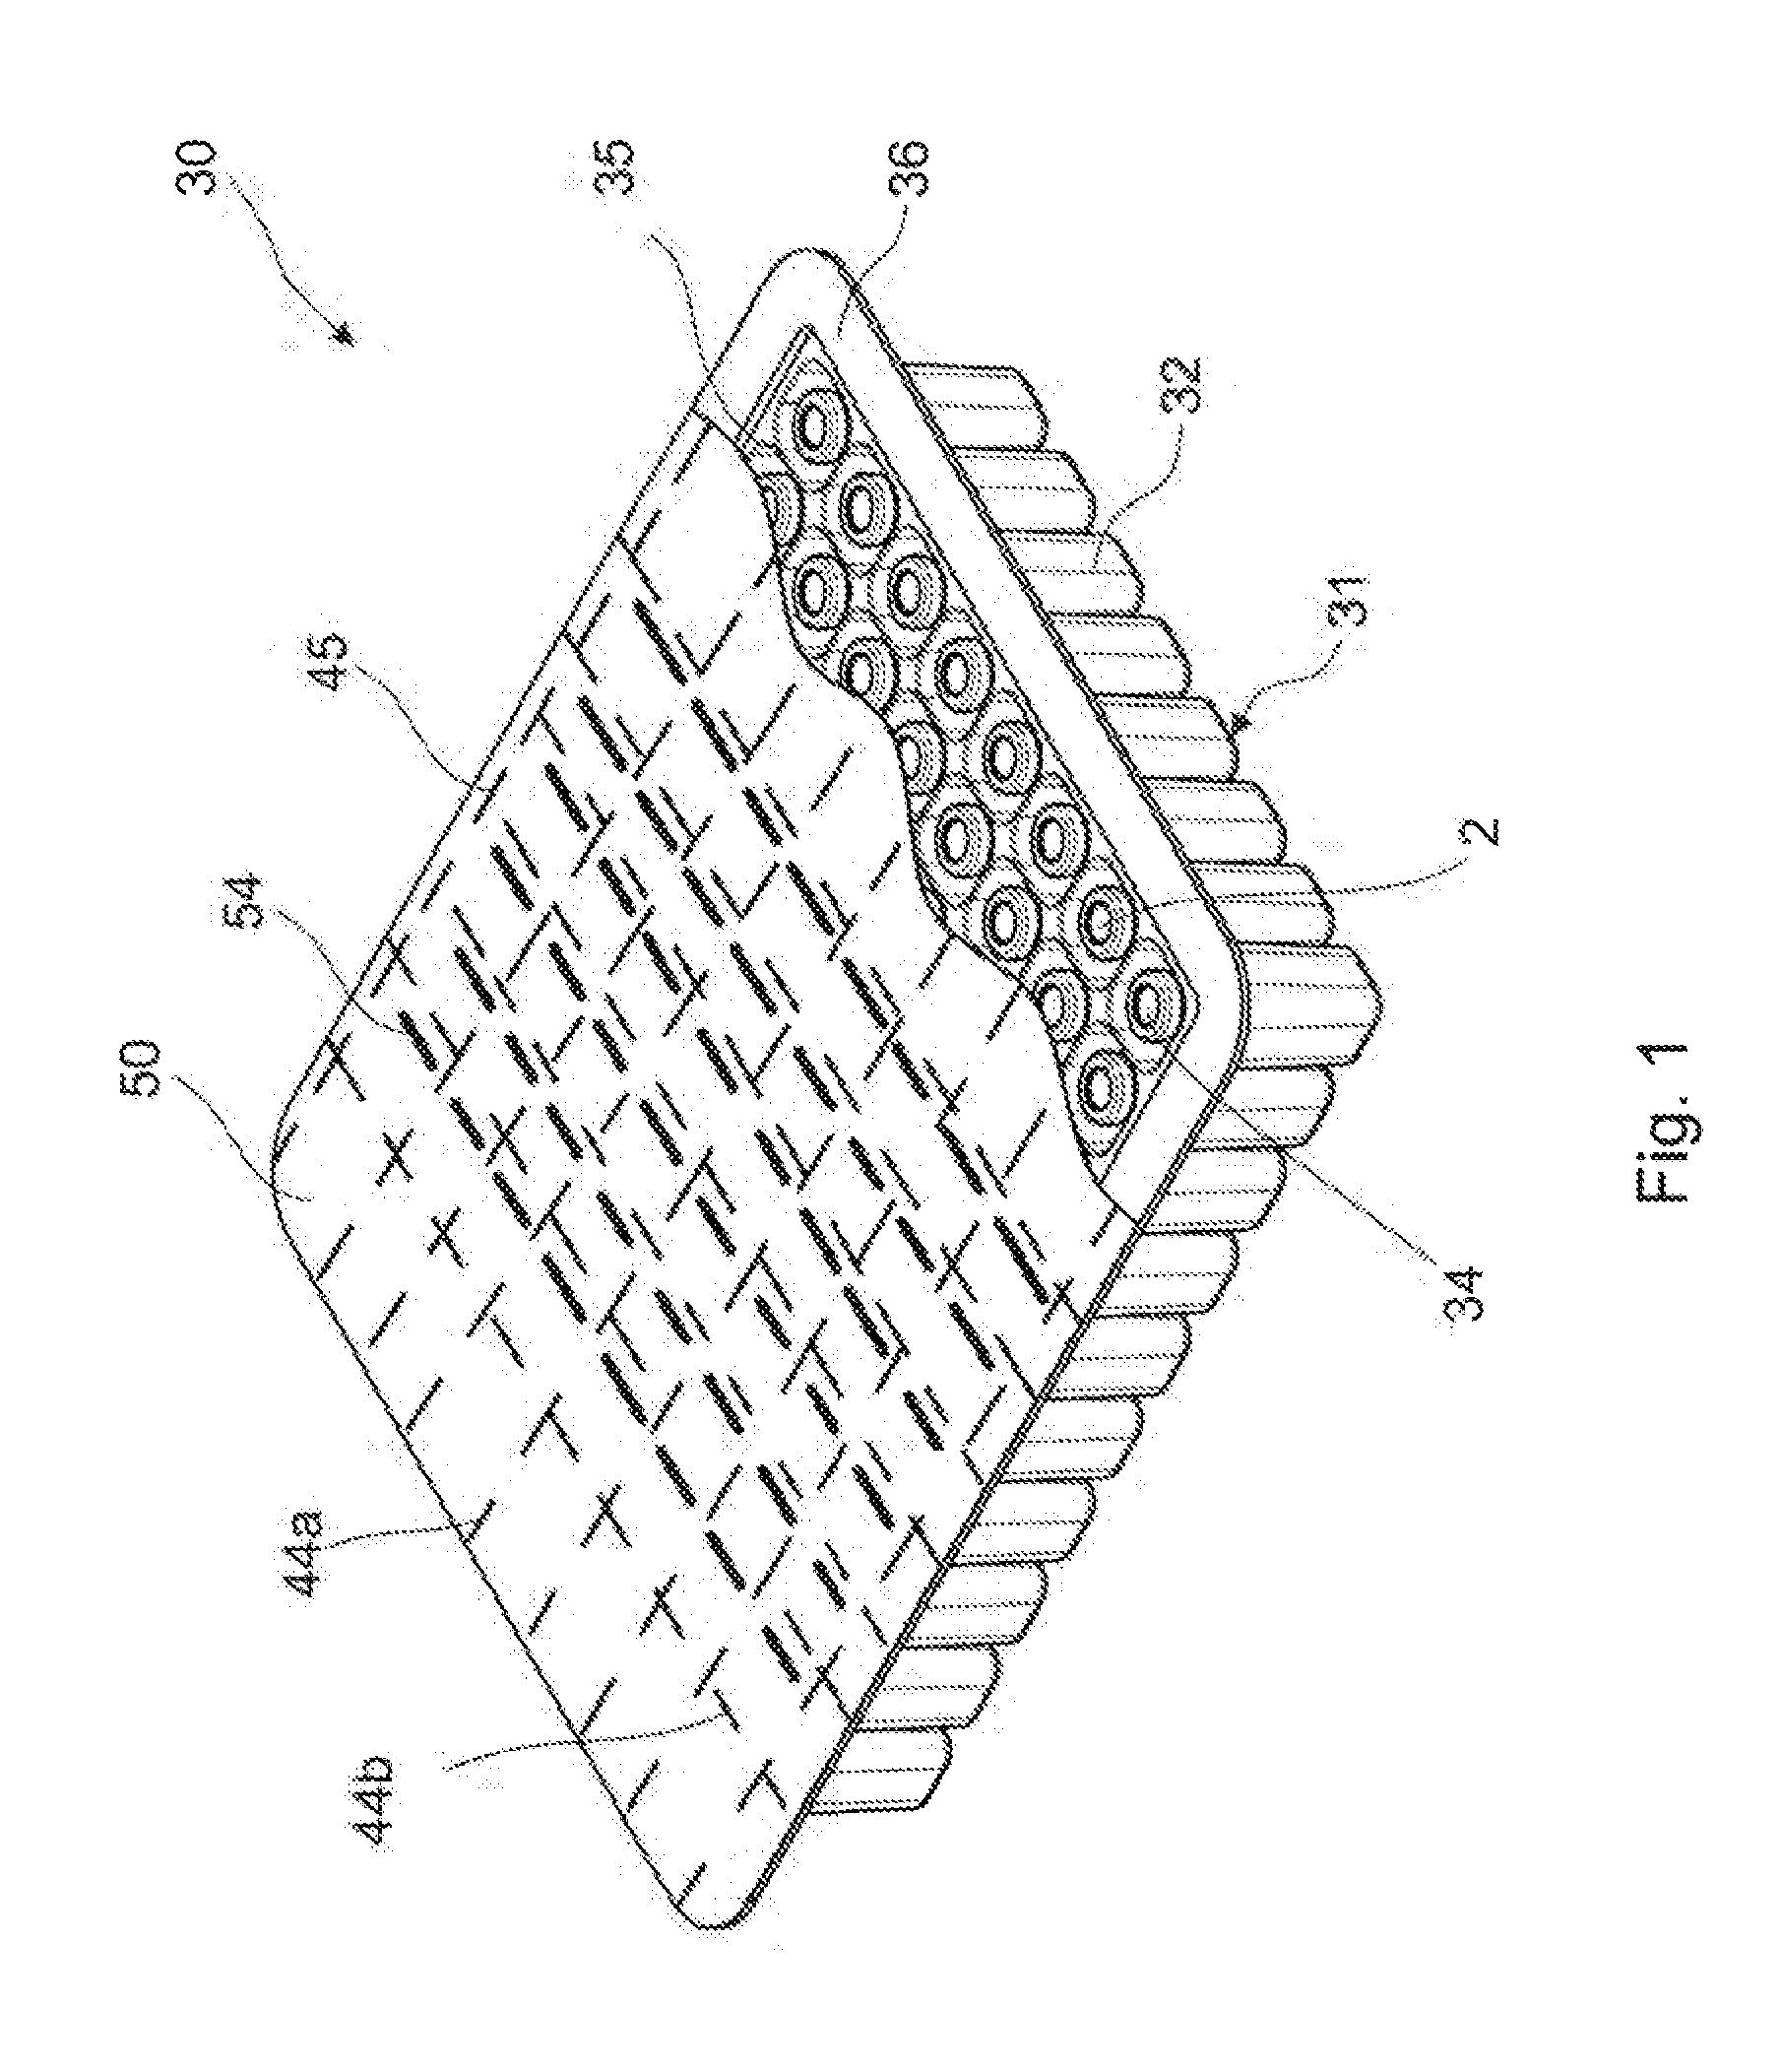 Packaging structure and method for sterile packaging containers for substances for medical, pharmaceutical or cosmetic applications and methods for further processing of containers using this packaging structure